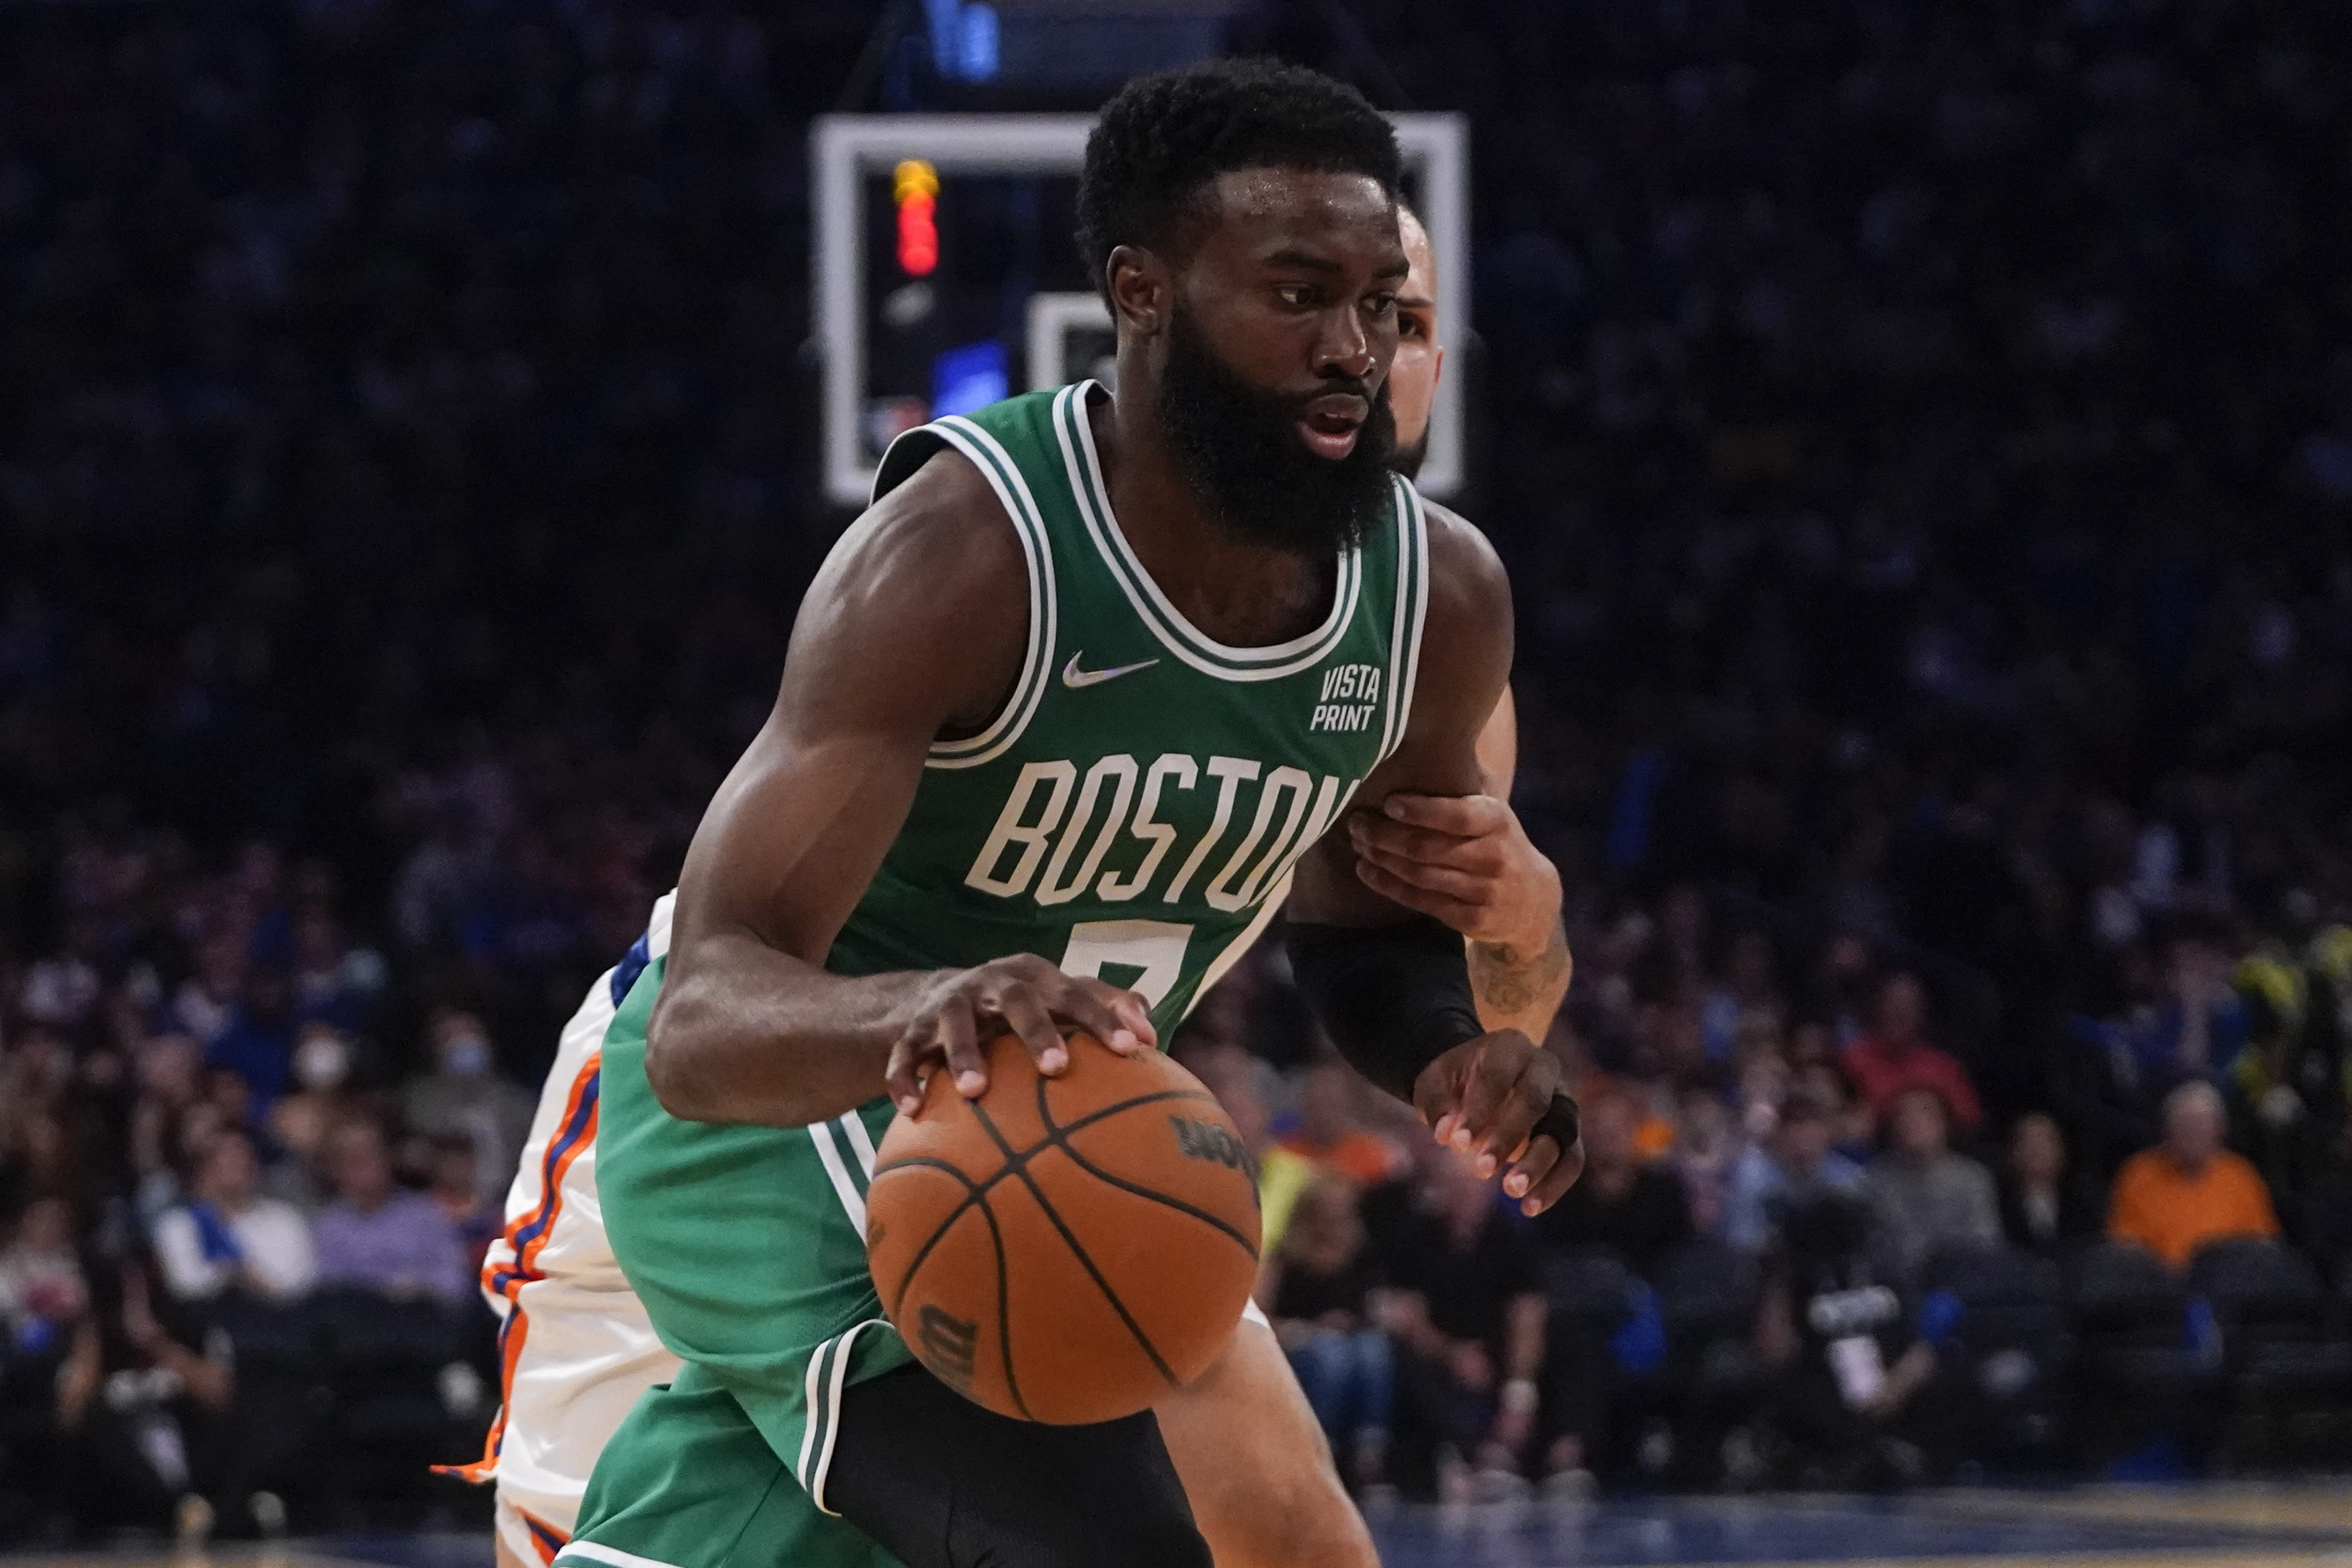 Why Does Jaylen Brown Wear a Mask? Here's What We Know